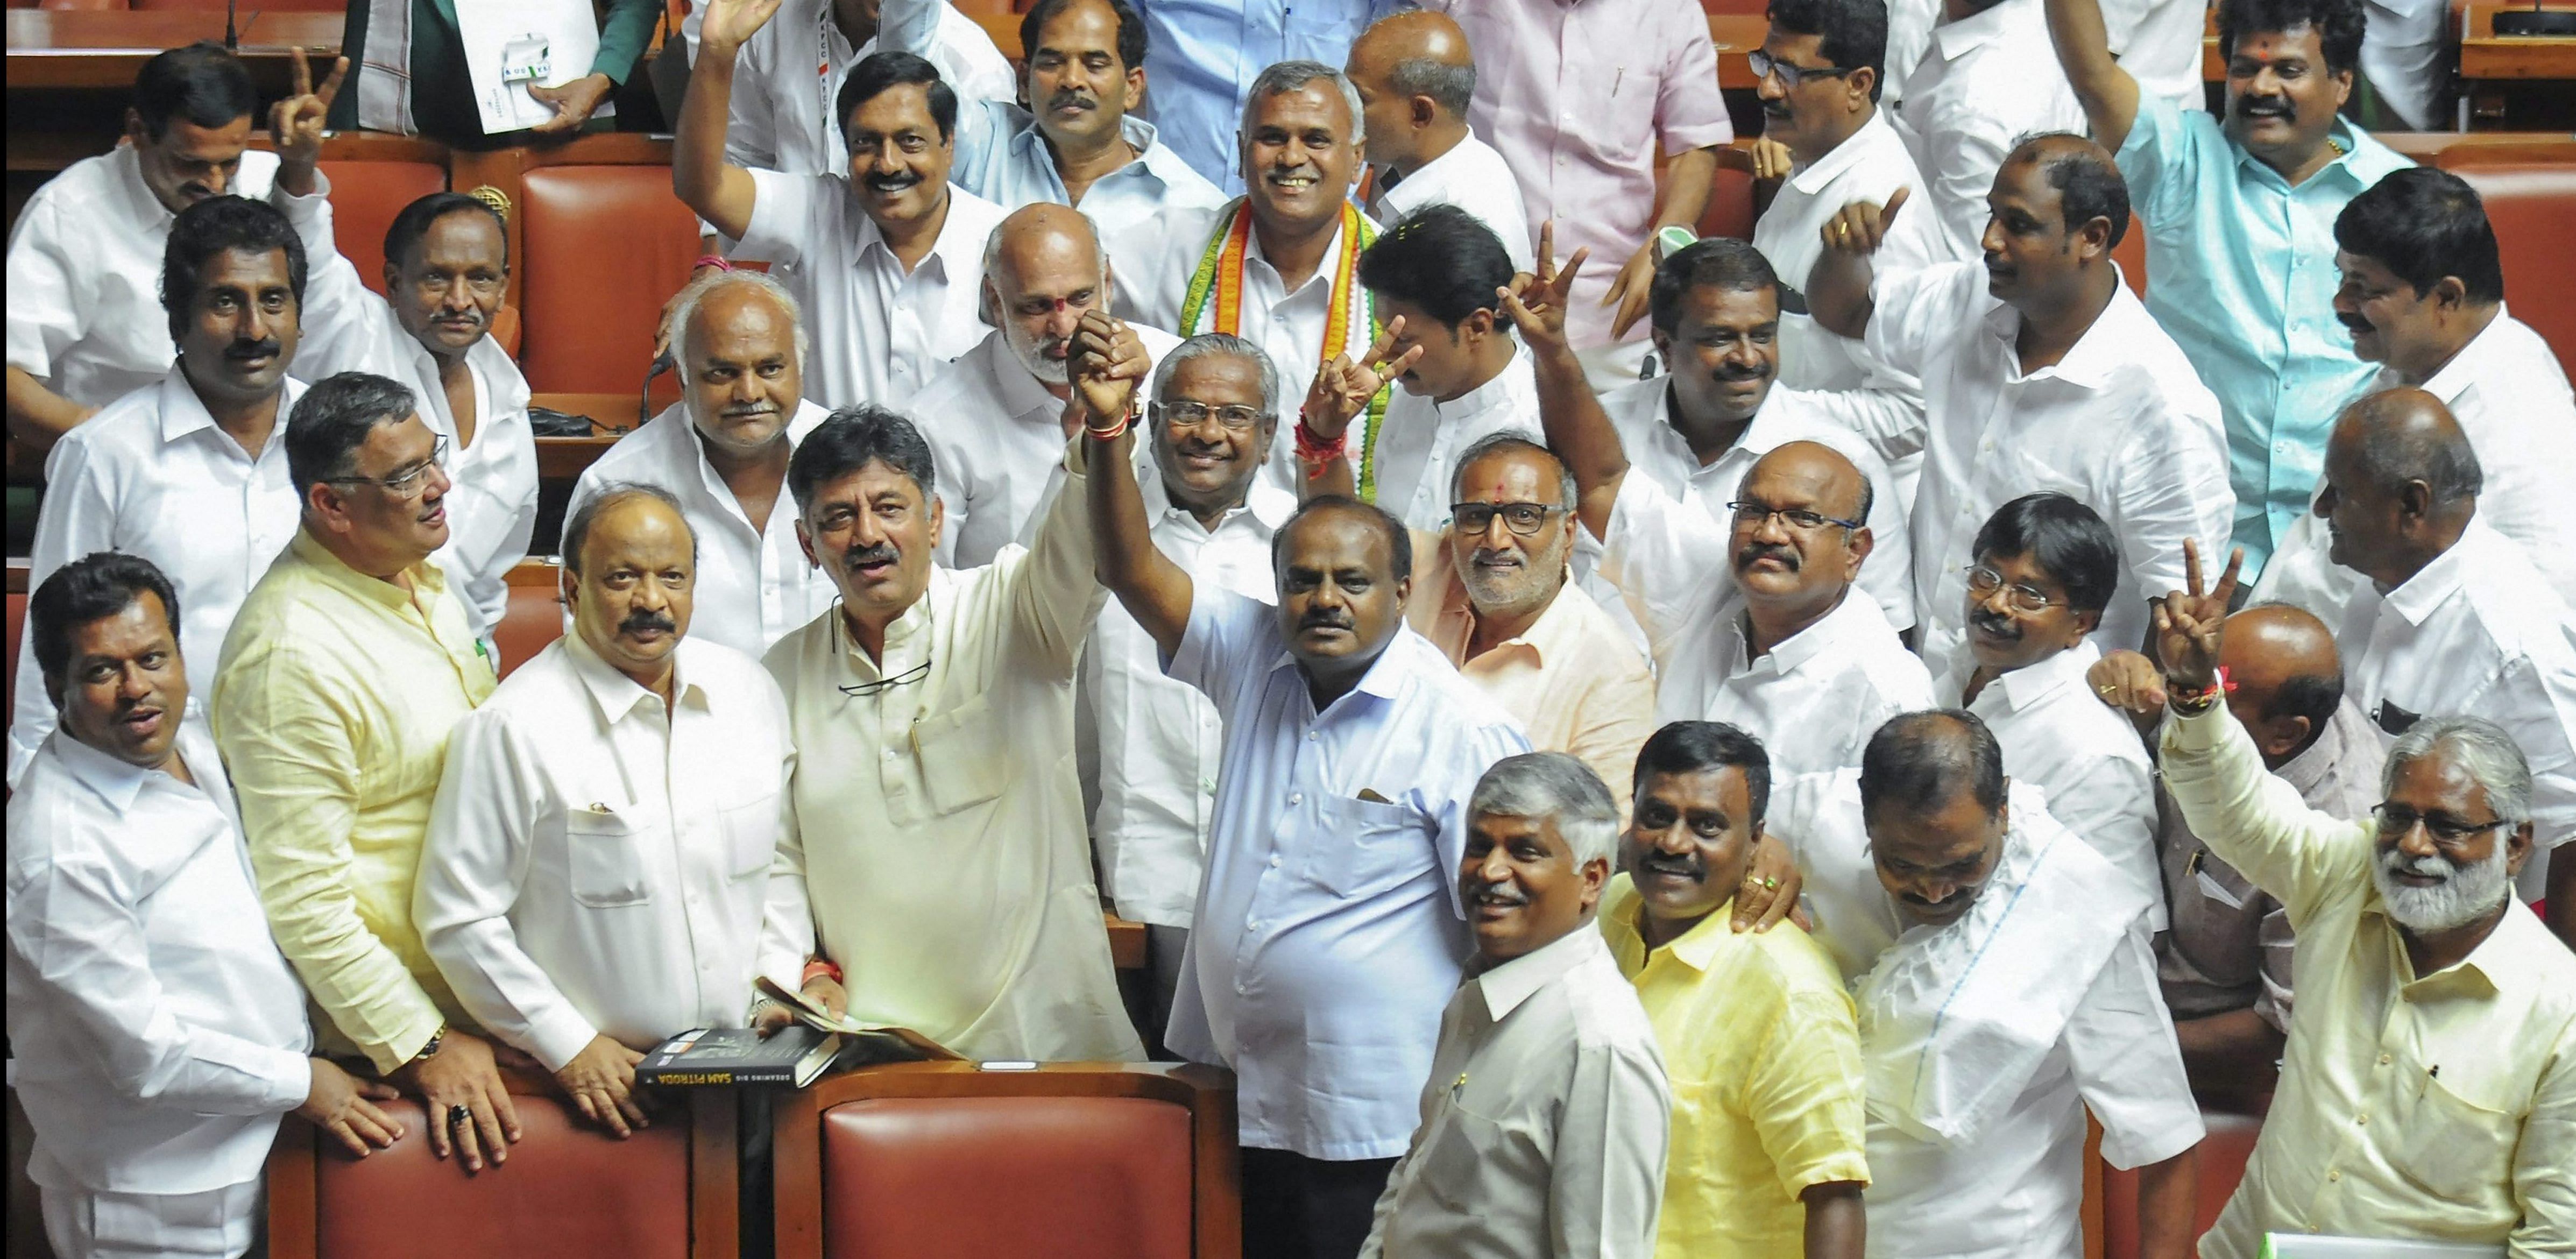 JD(S) leader H.D. Kumaraswamy and party MLAs show victory sign